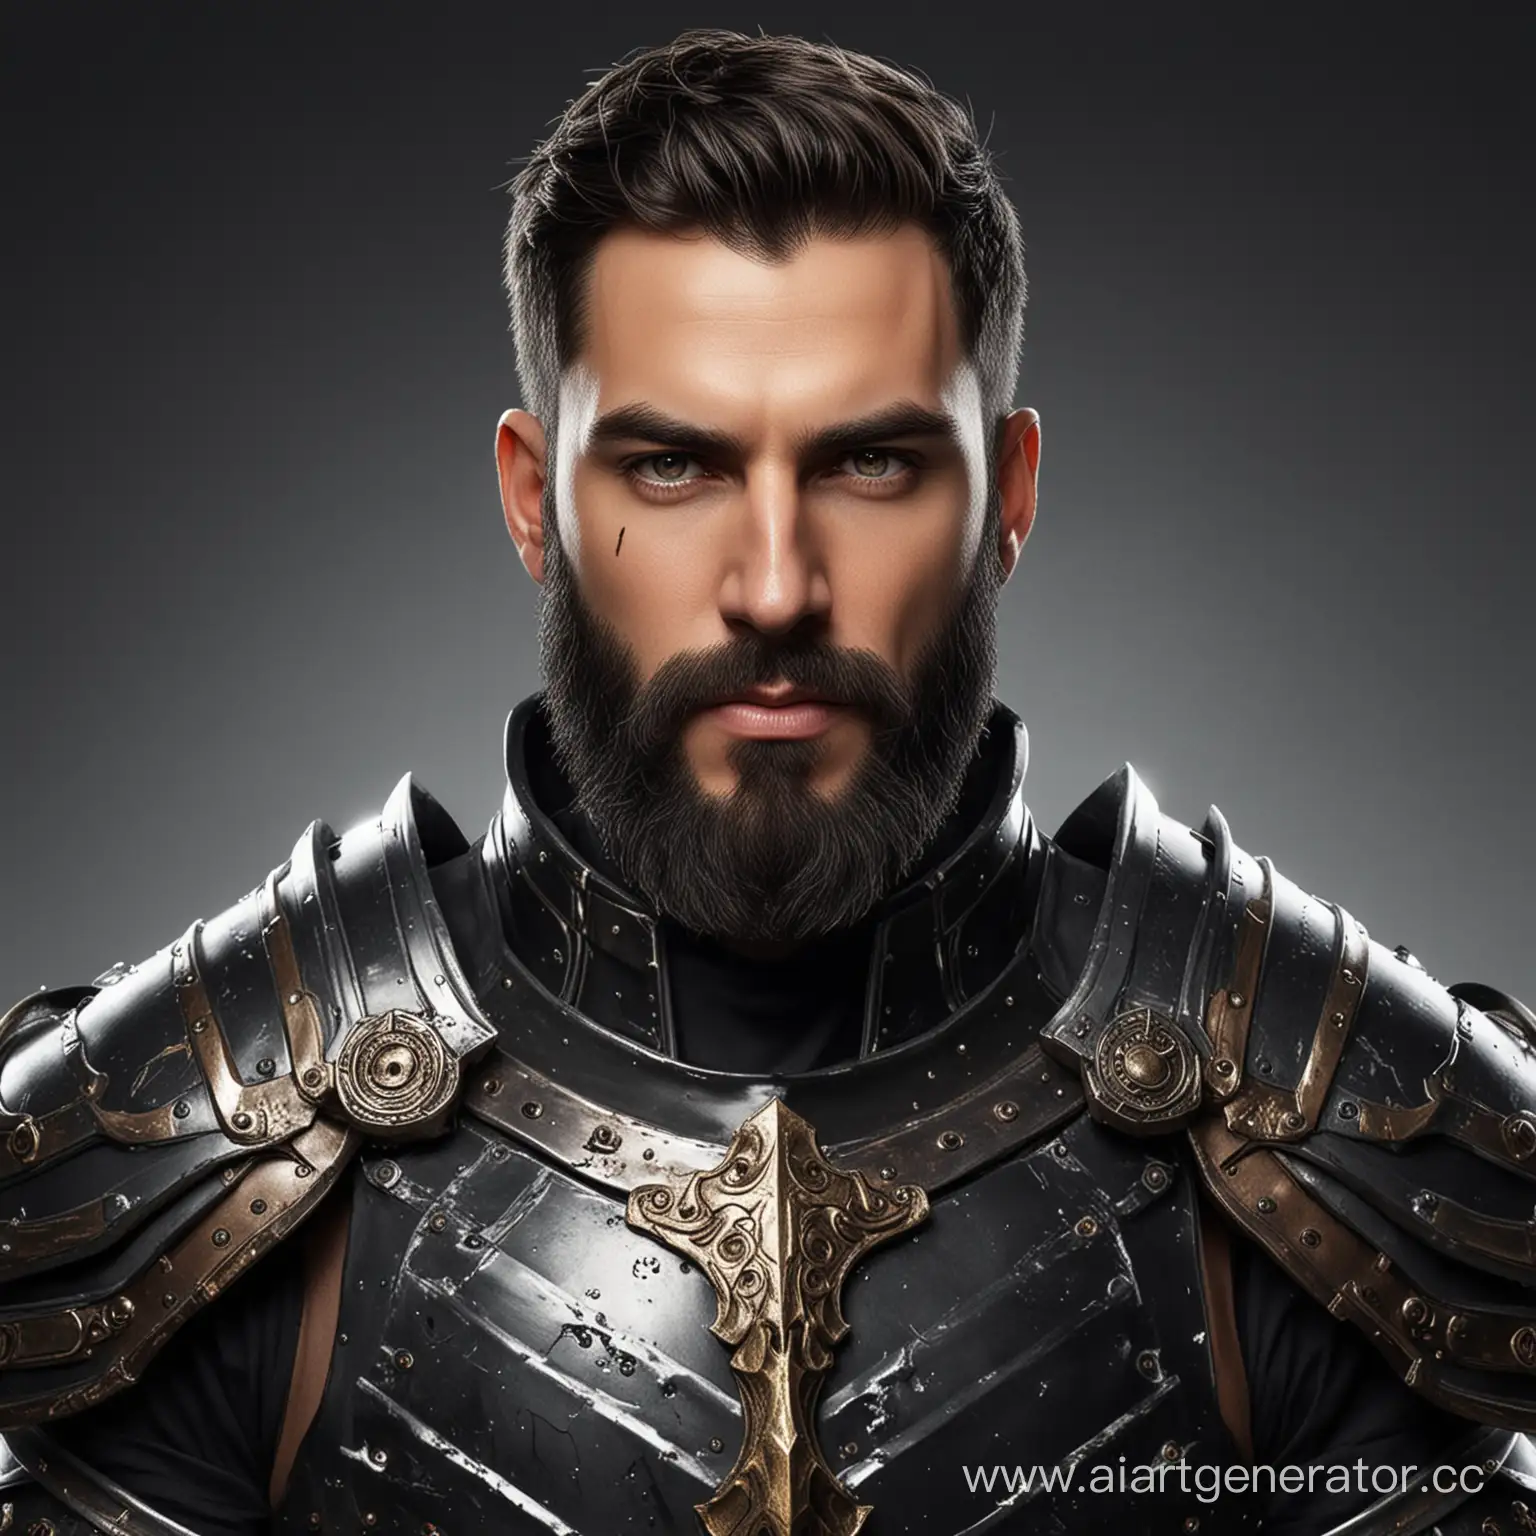 Formidable-30YearOld-Paladin-in-Black-Armor-with-a-Fierce-Face